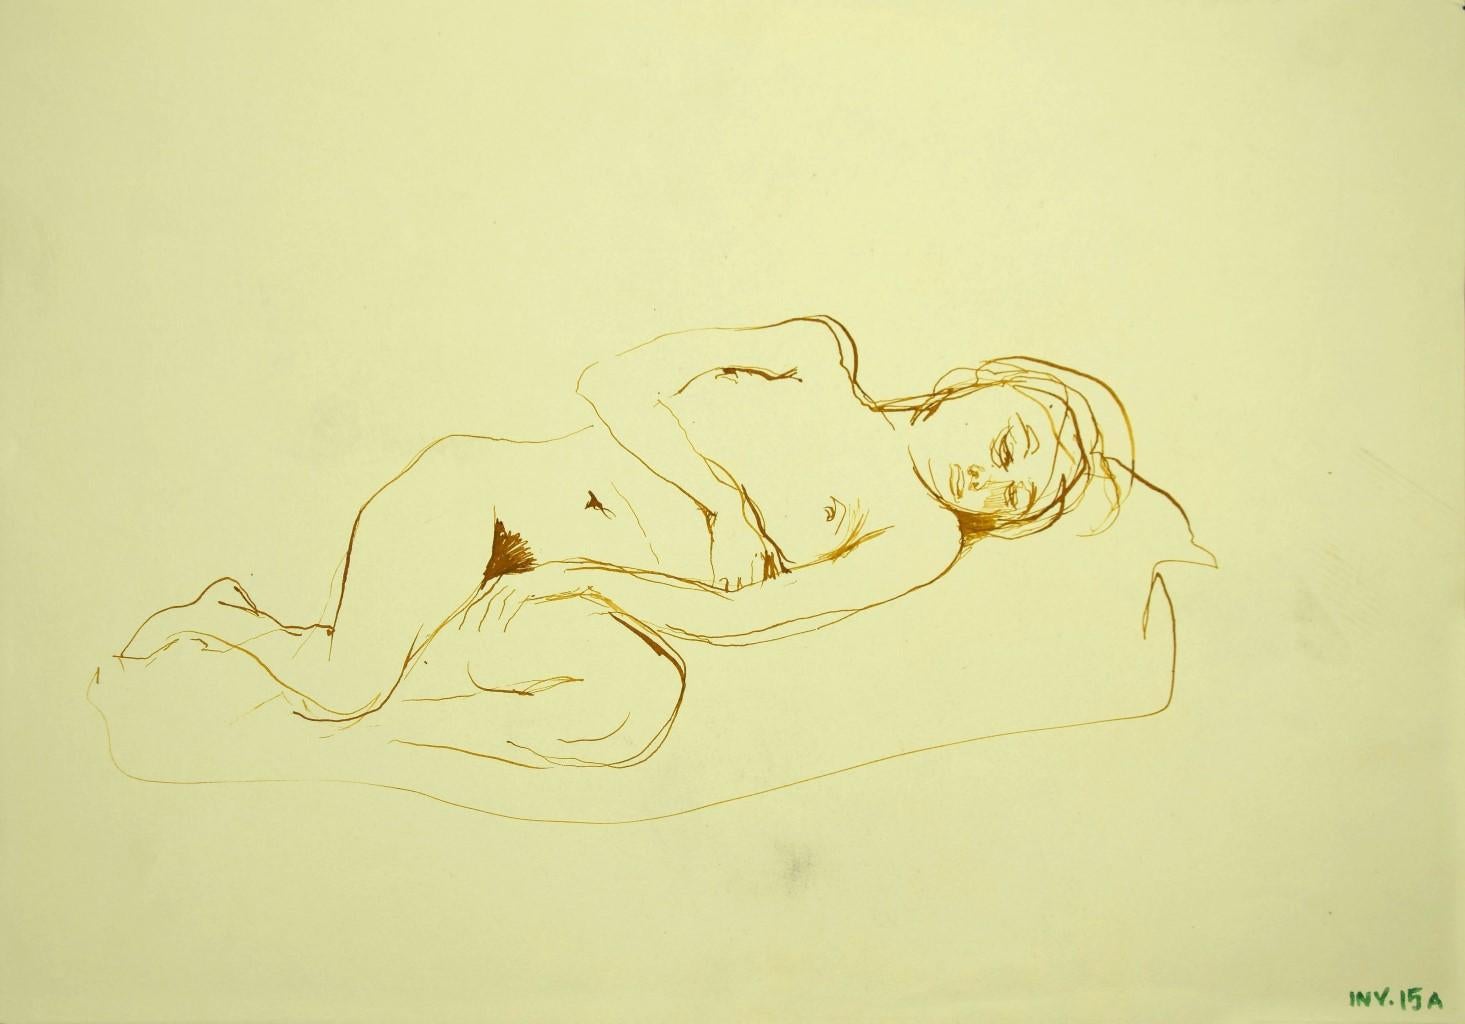 Nude - Mixed Media Drawing on Paper - 1970s - Mixed Media Art by Leo Guida